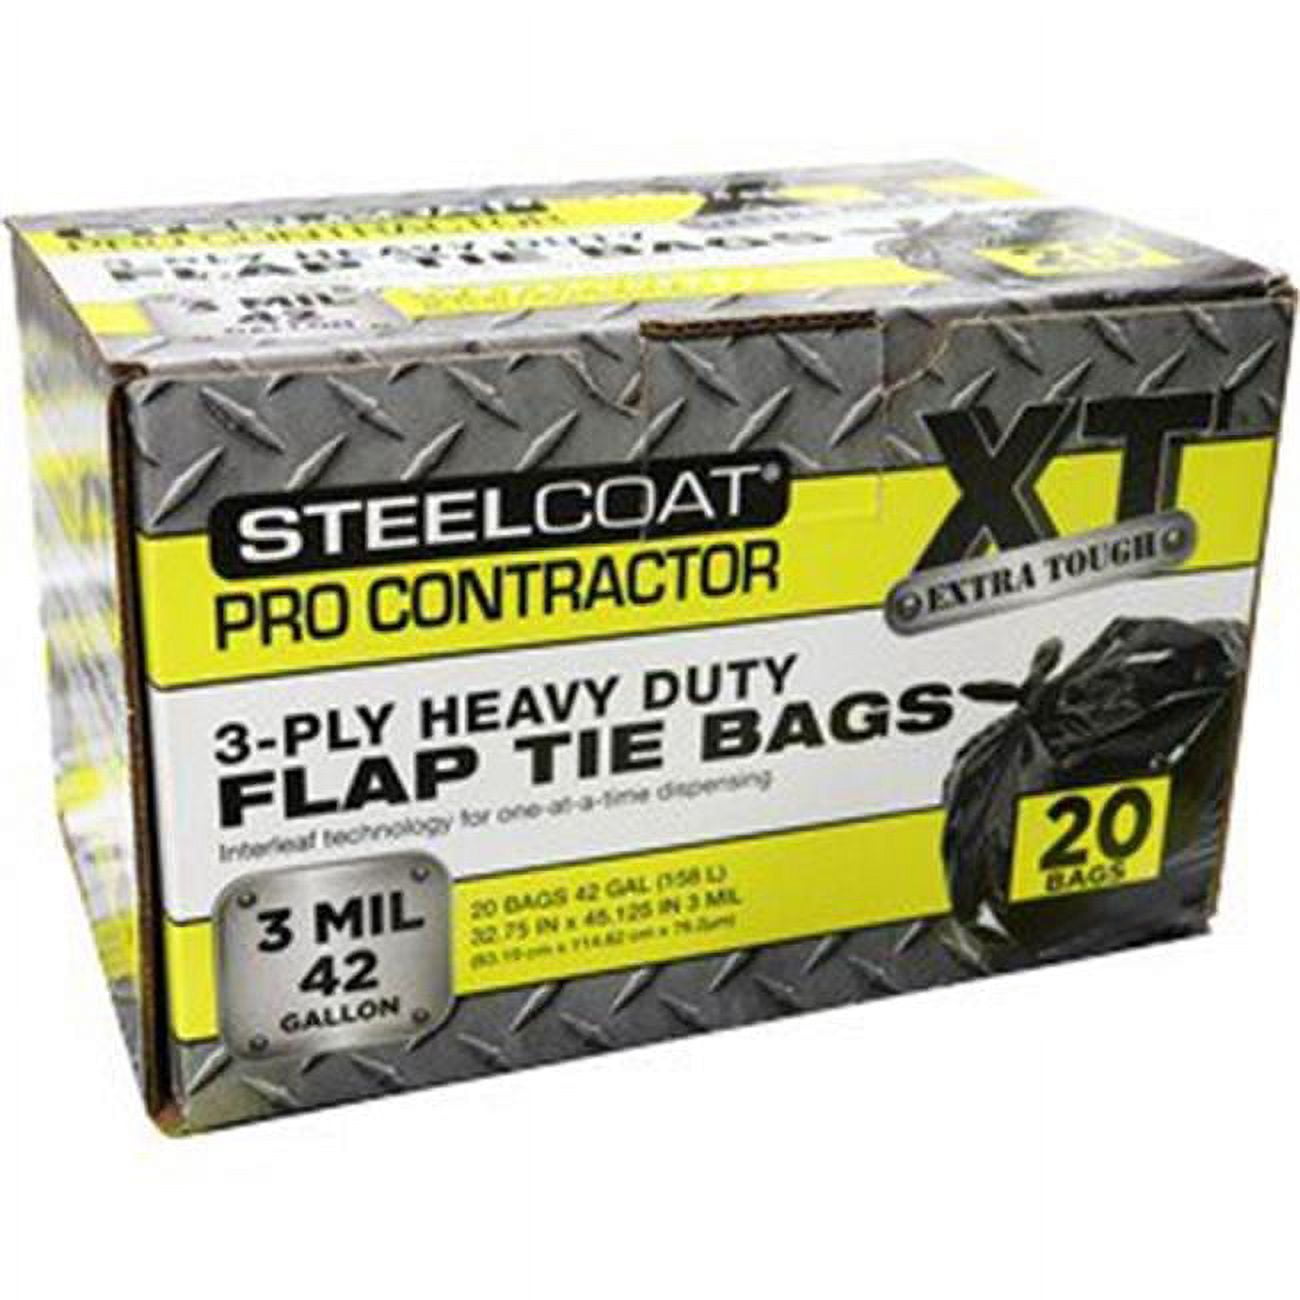 Homeline 42 Gallon Flap Tie Contractor Bags, 16-ct. Boxes